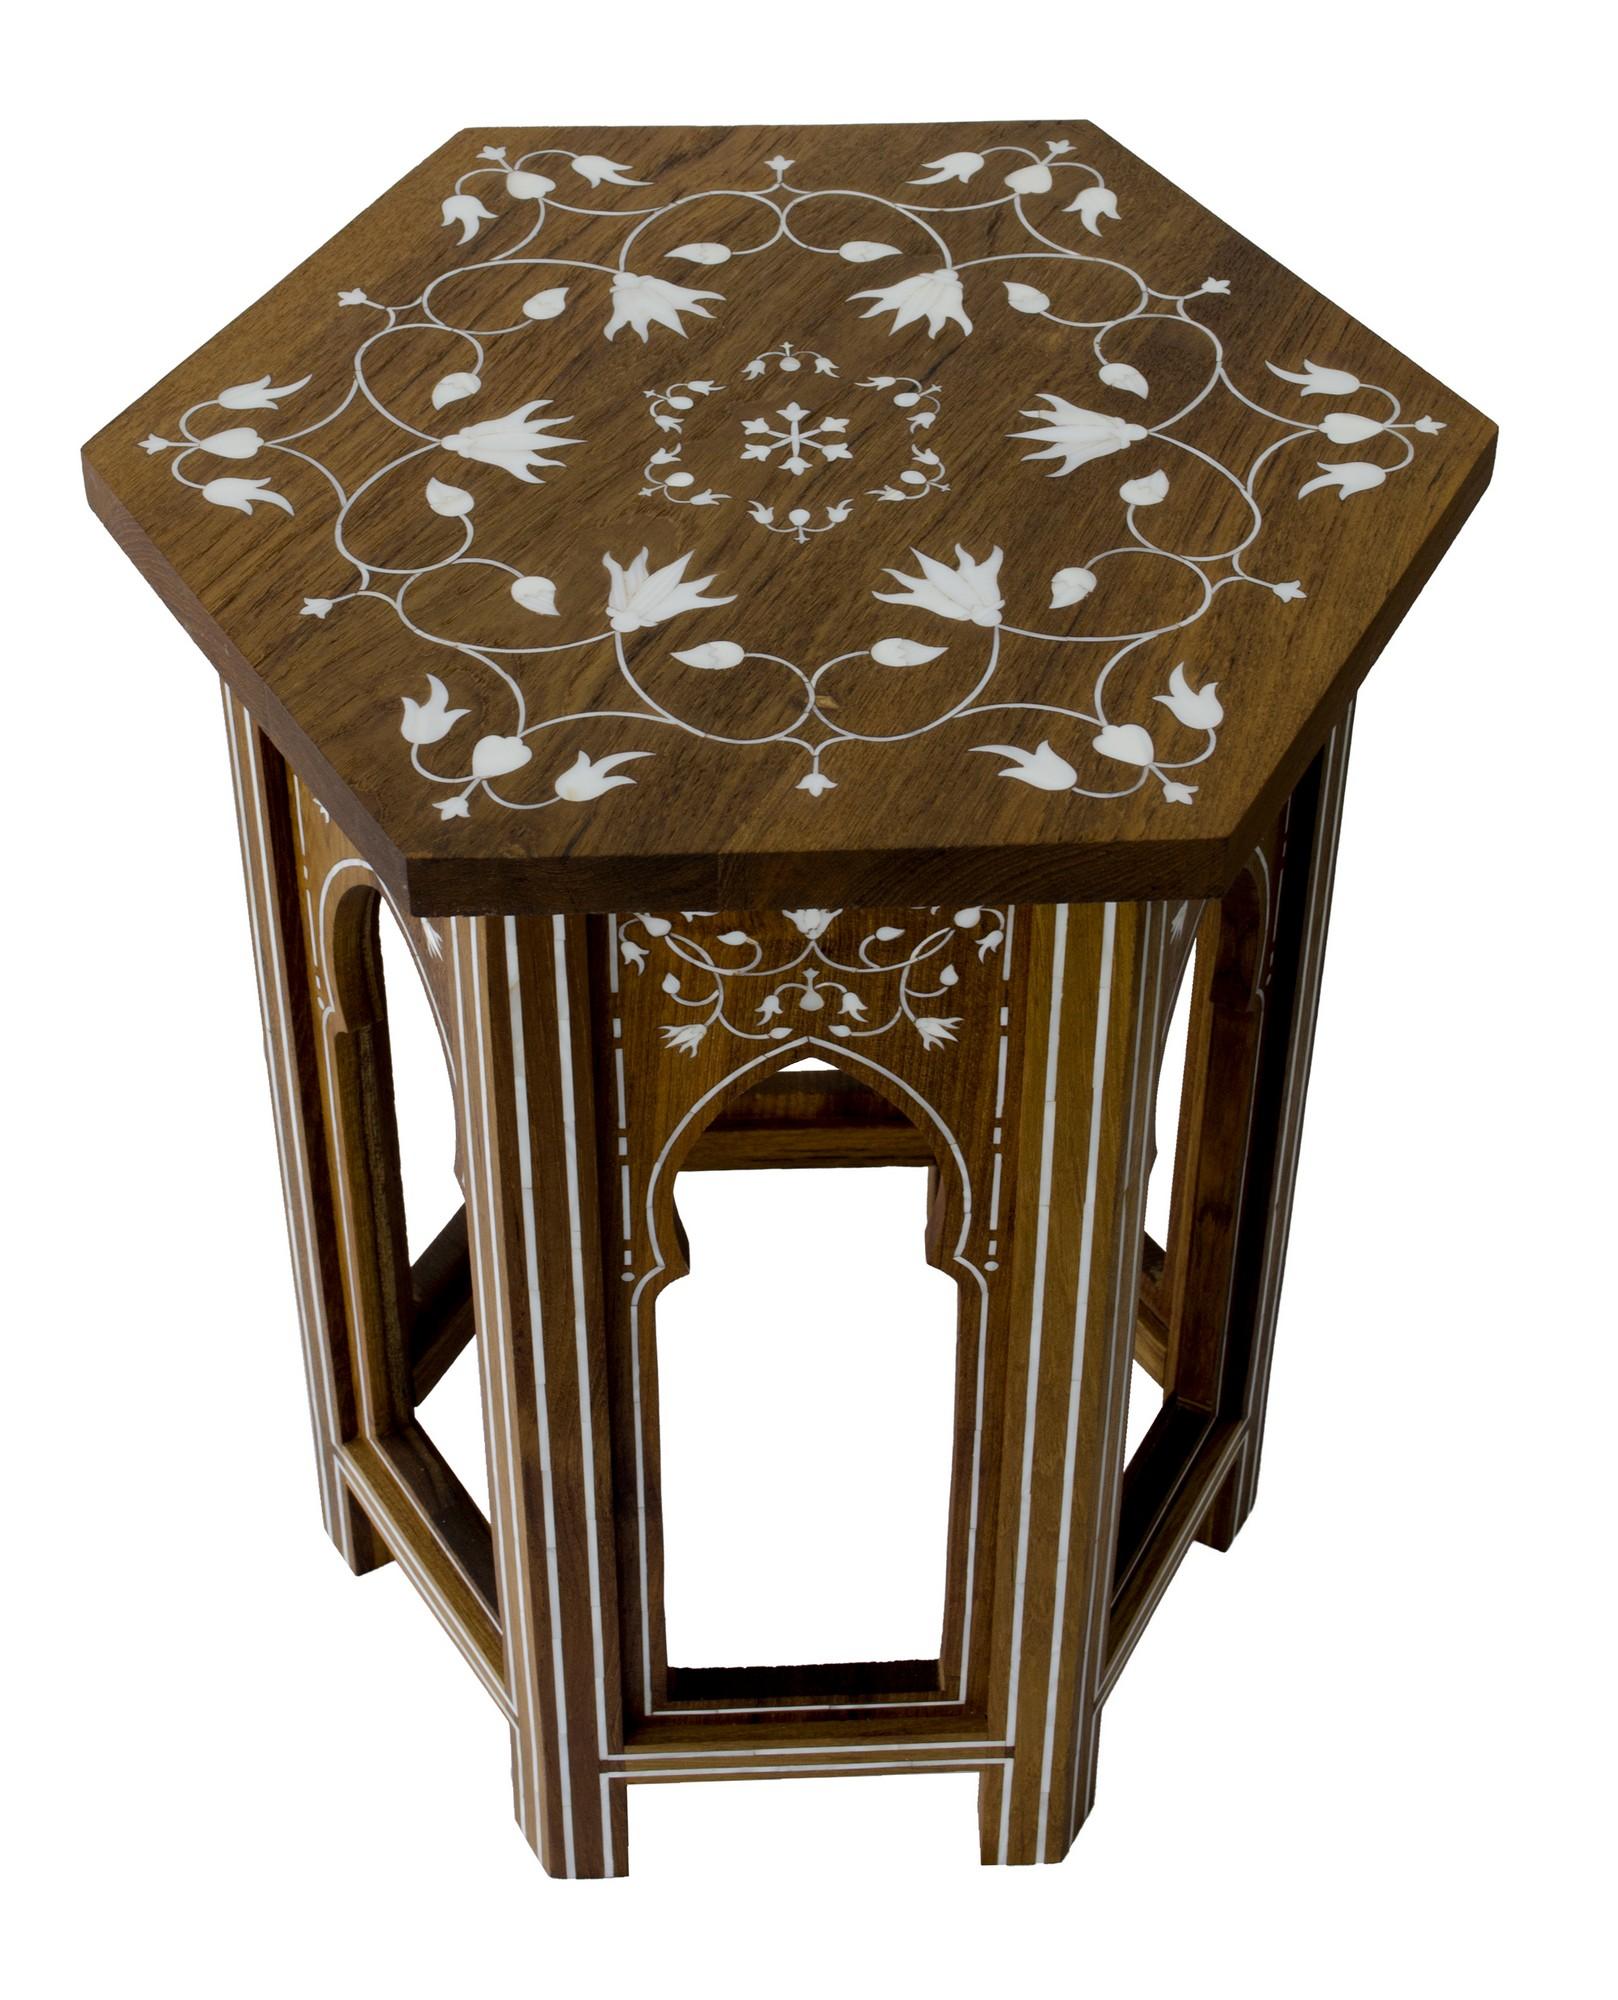 Pair of side tables, Mihrab bed side tables with Mother of Pearl Inlay in Wood is inspired by the Mihrab element of Indian architecture, this simple design from Stephane Odegard's Udaipur Atelier, uses the intricate mother of pearl work on the top